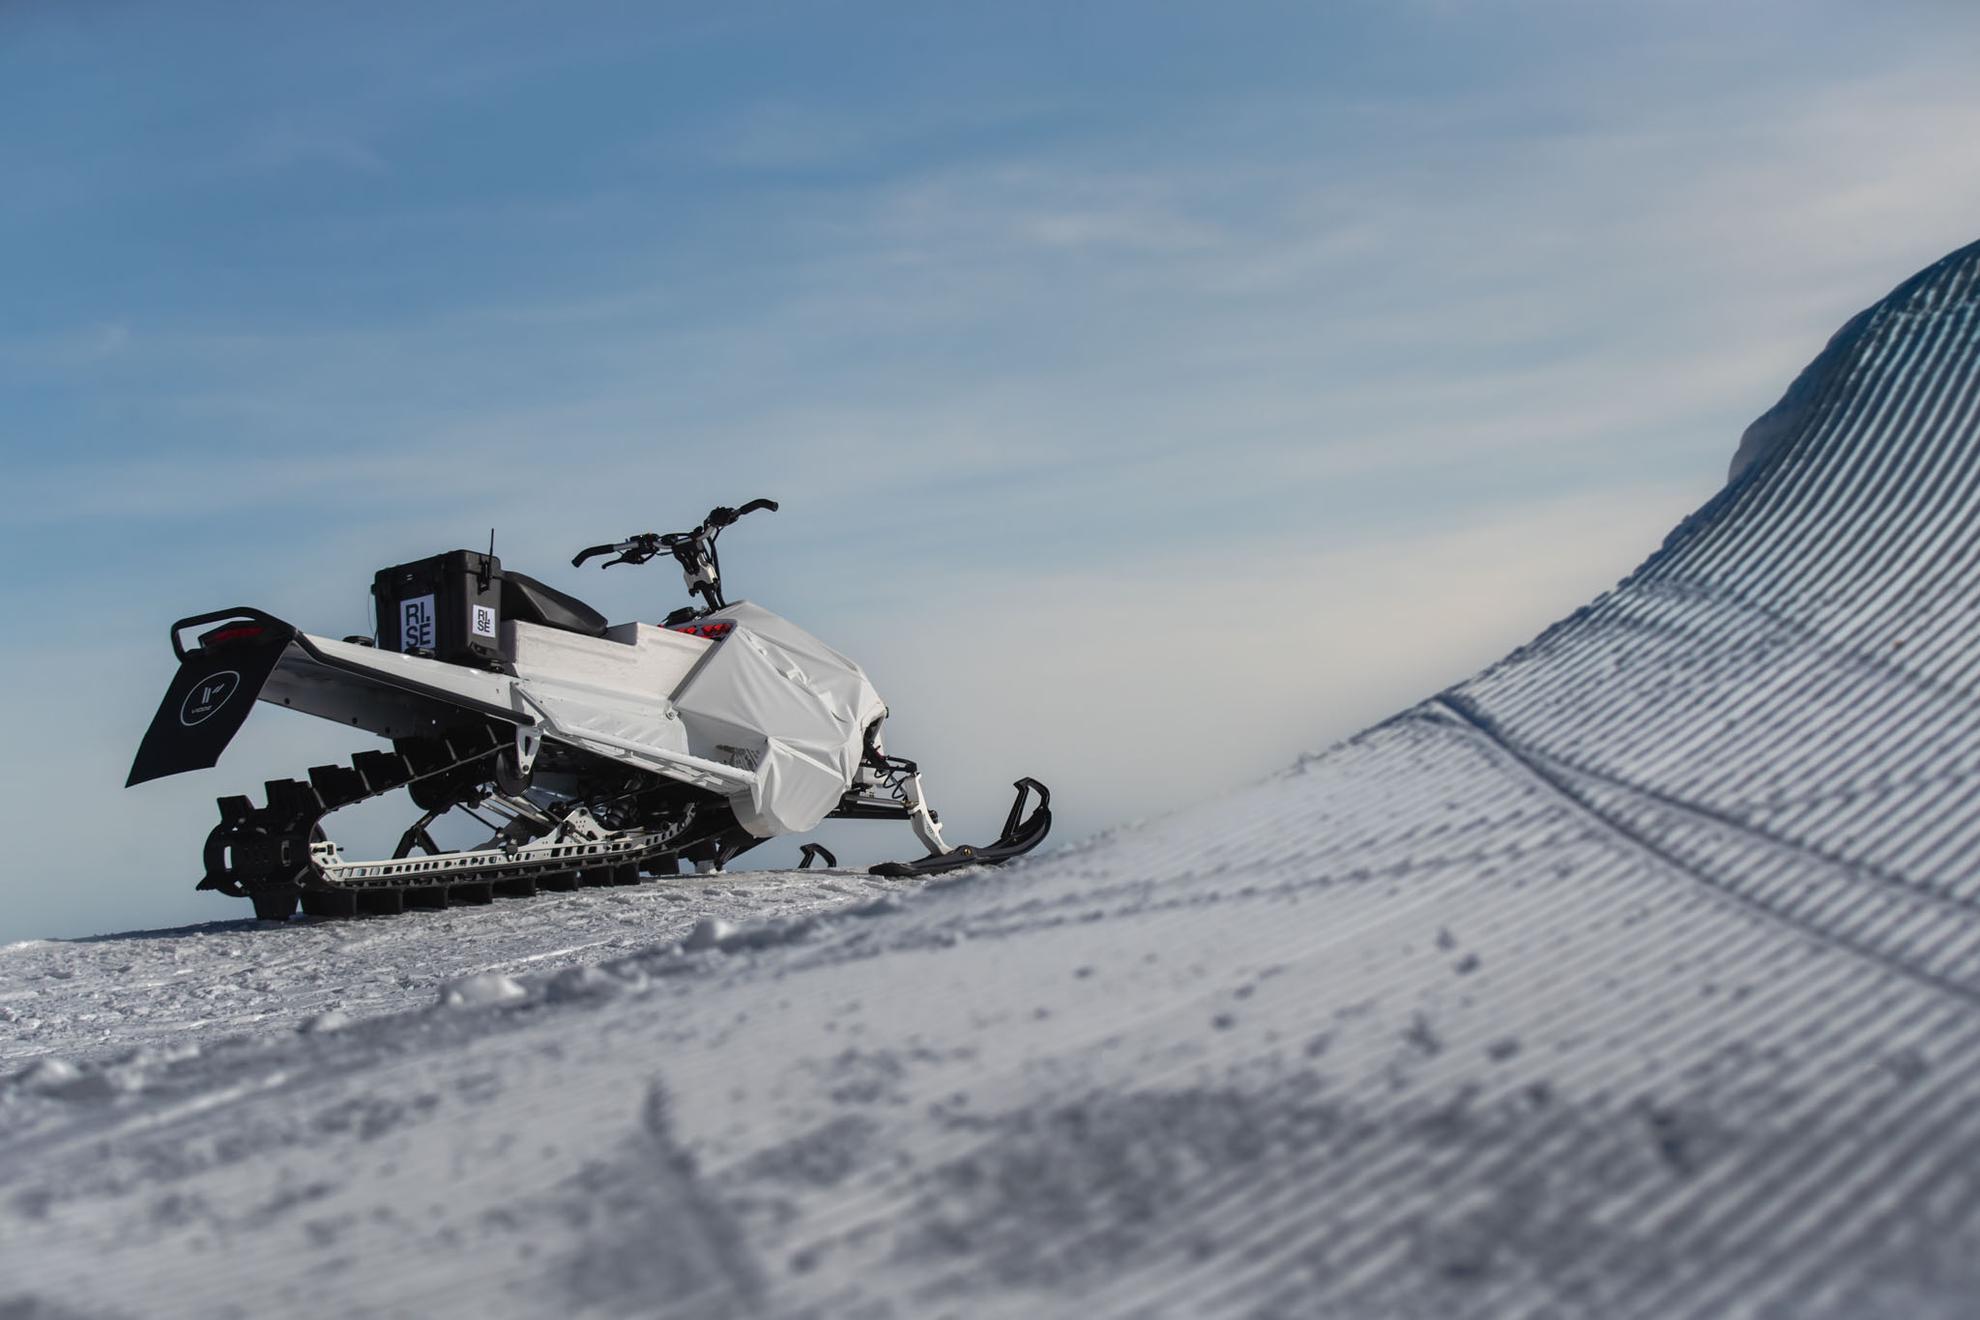 An electric snowmobile from the manufacturer Vidde in the Swedish winter landscape.